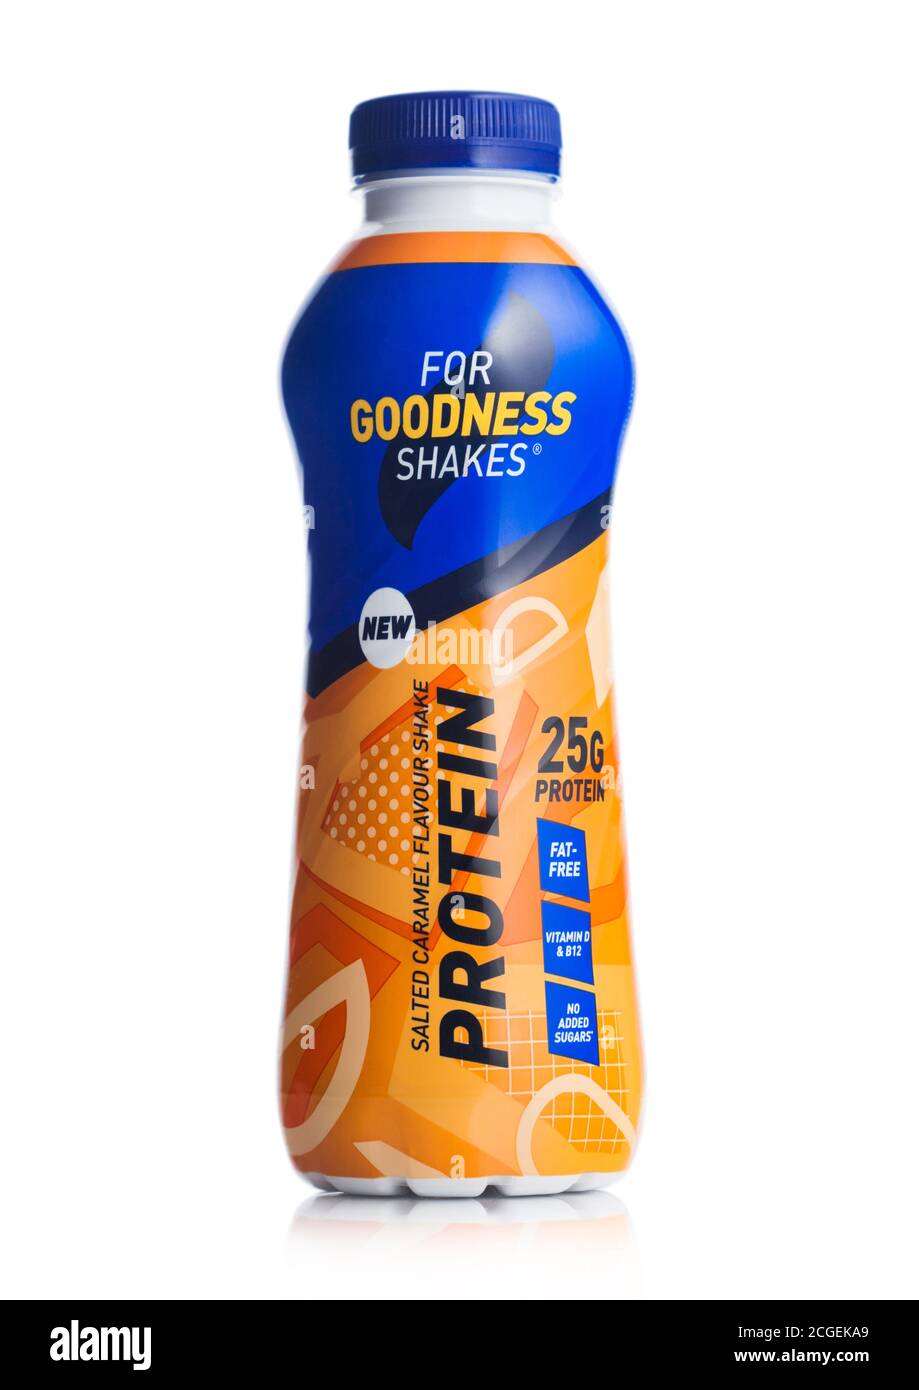 LONDON, UK - SEPTEMBER 09, 2020: Plastic bottle of Goodness shakes protein drink with salted caramel on white background. Stock Photo